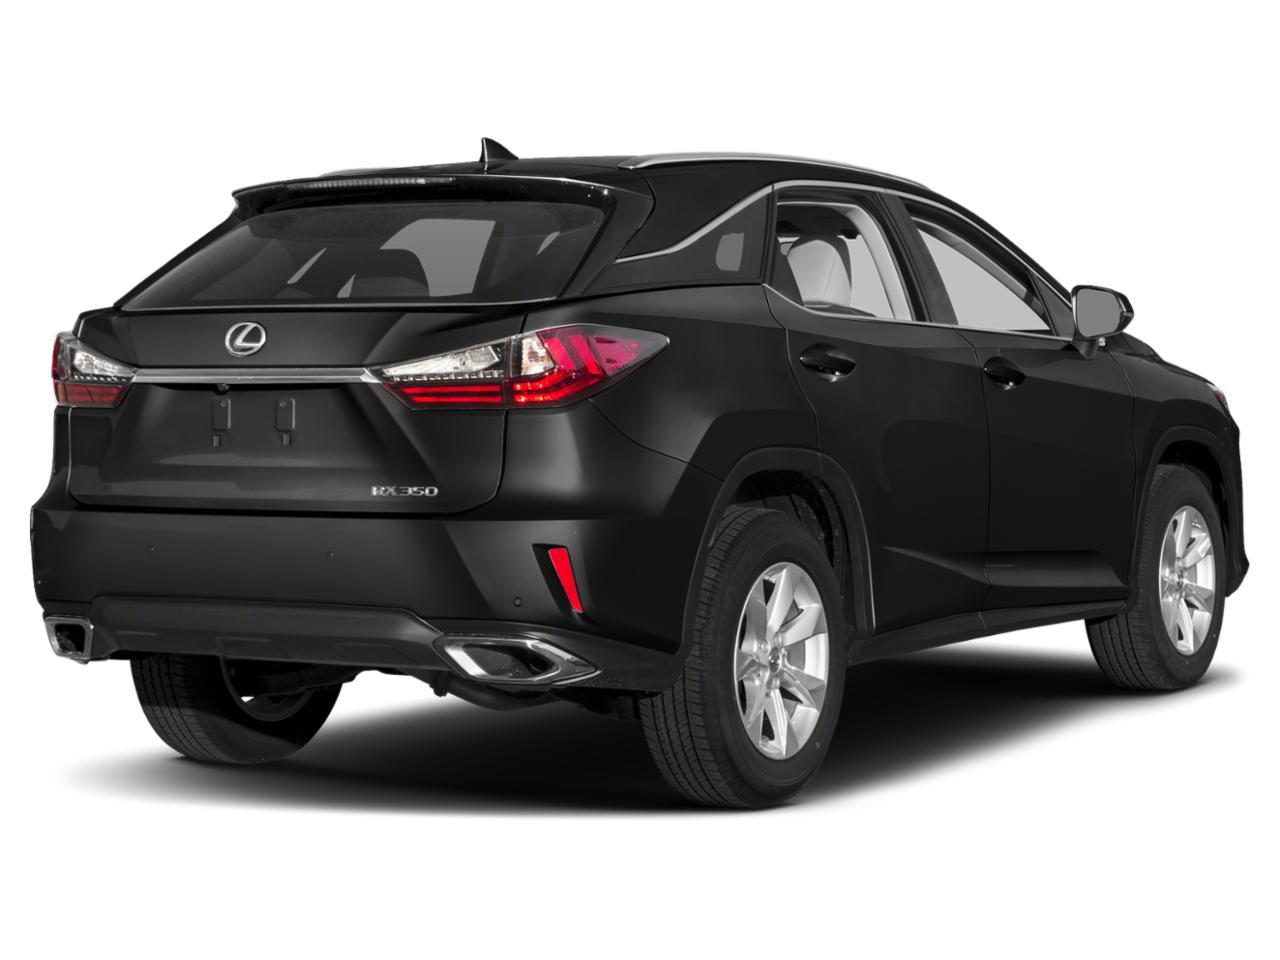 Used 2018 Lexus RX 350 in Obsidian for Sale in Baltimore | J2037323 ...